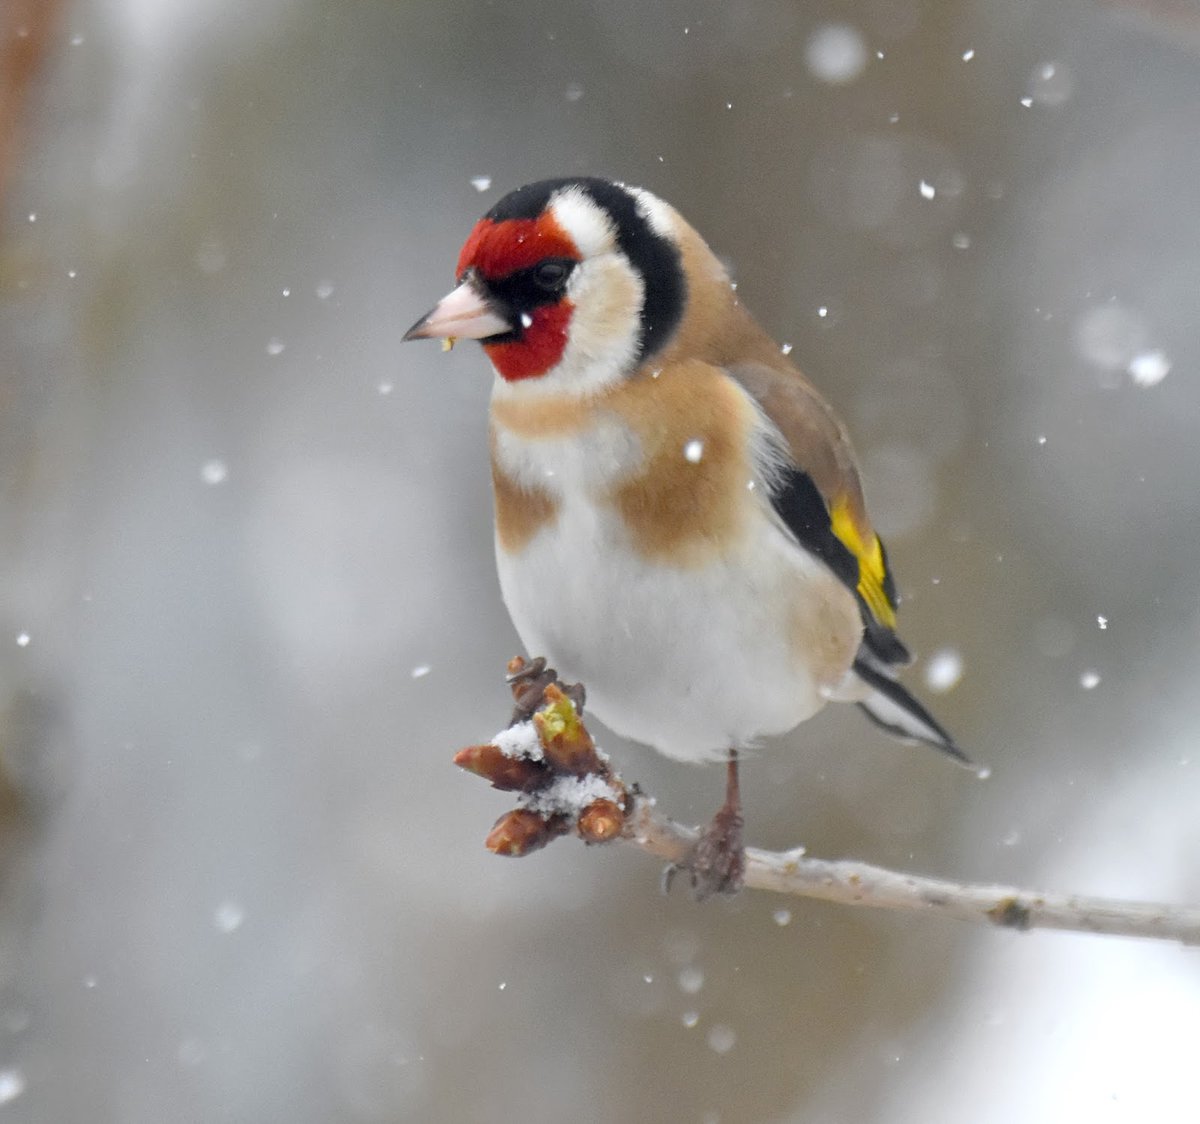 Goldfinch. Increasingly common in UK gardens, usually arriving at feeders in small bickering groups. The beautiful red face is distinctive, as is the yellow/gold stripe on their wings, which gives them their name. #SelfIsolationBirdWatch 